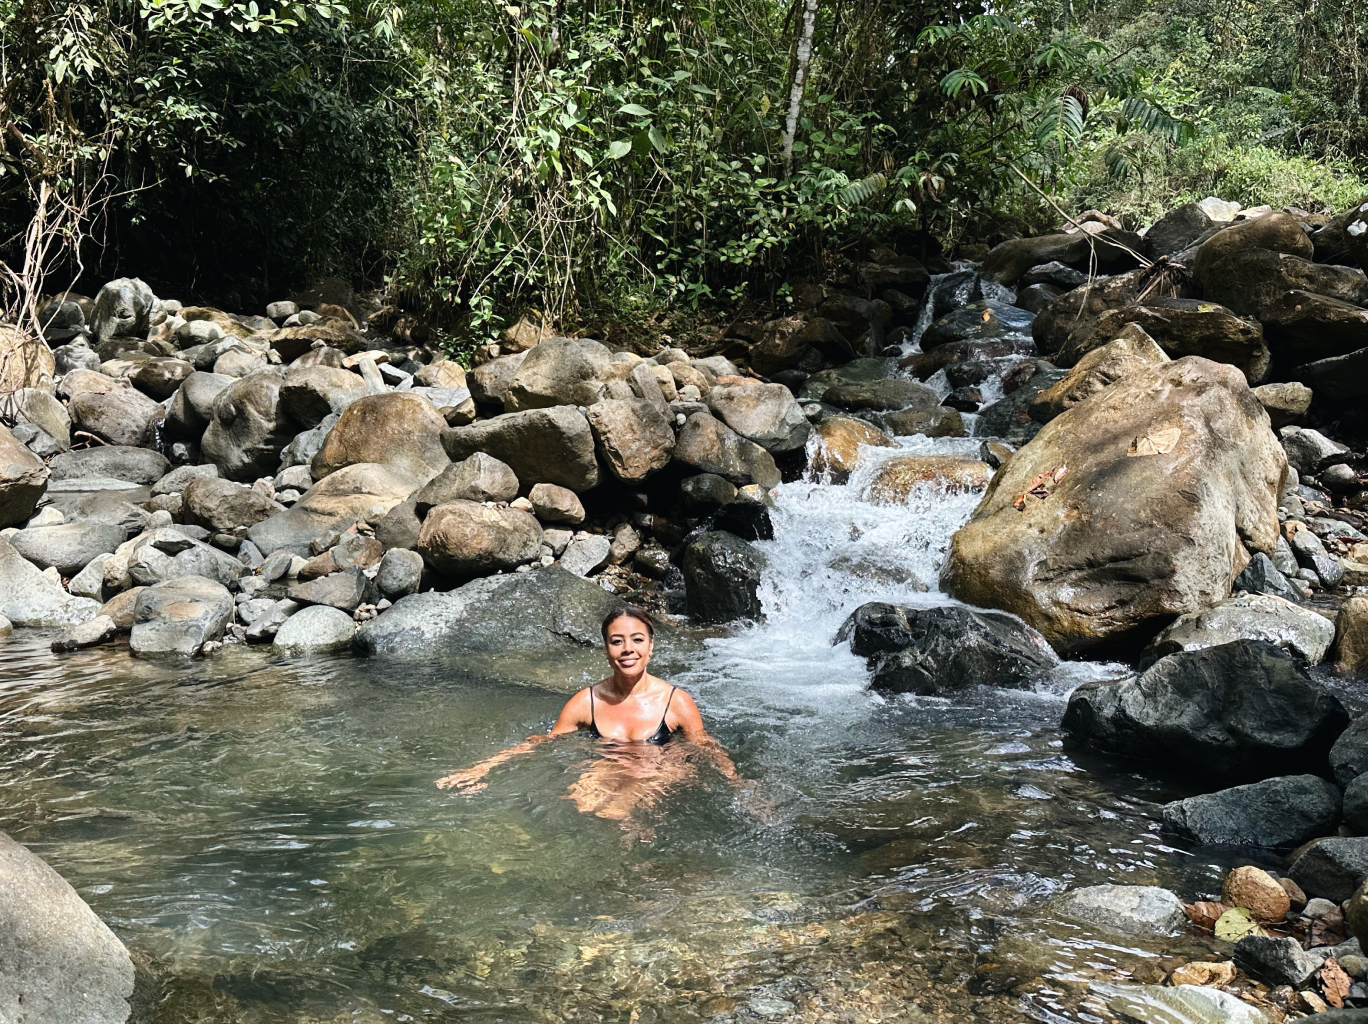 Nancy Twine in a bath carved from stone, traveling solo in Costa Rica